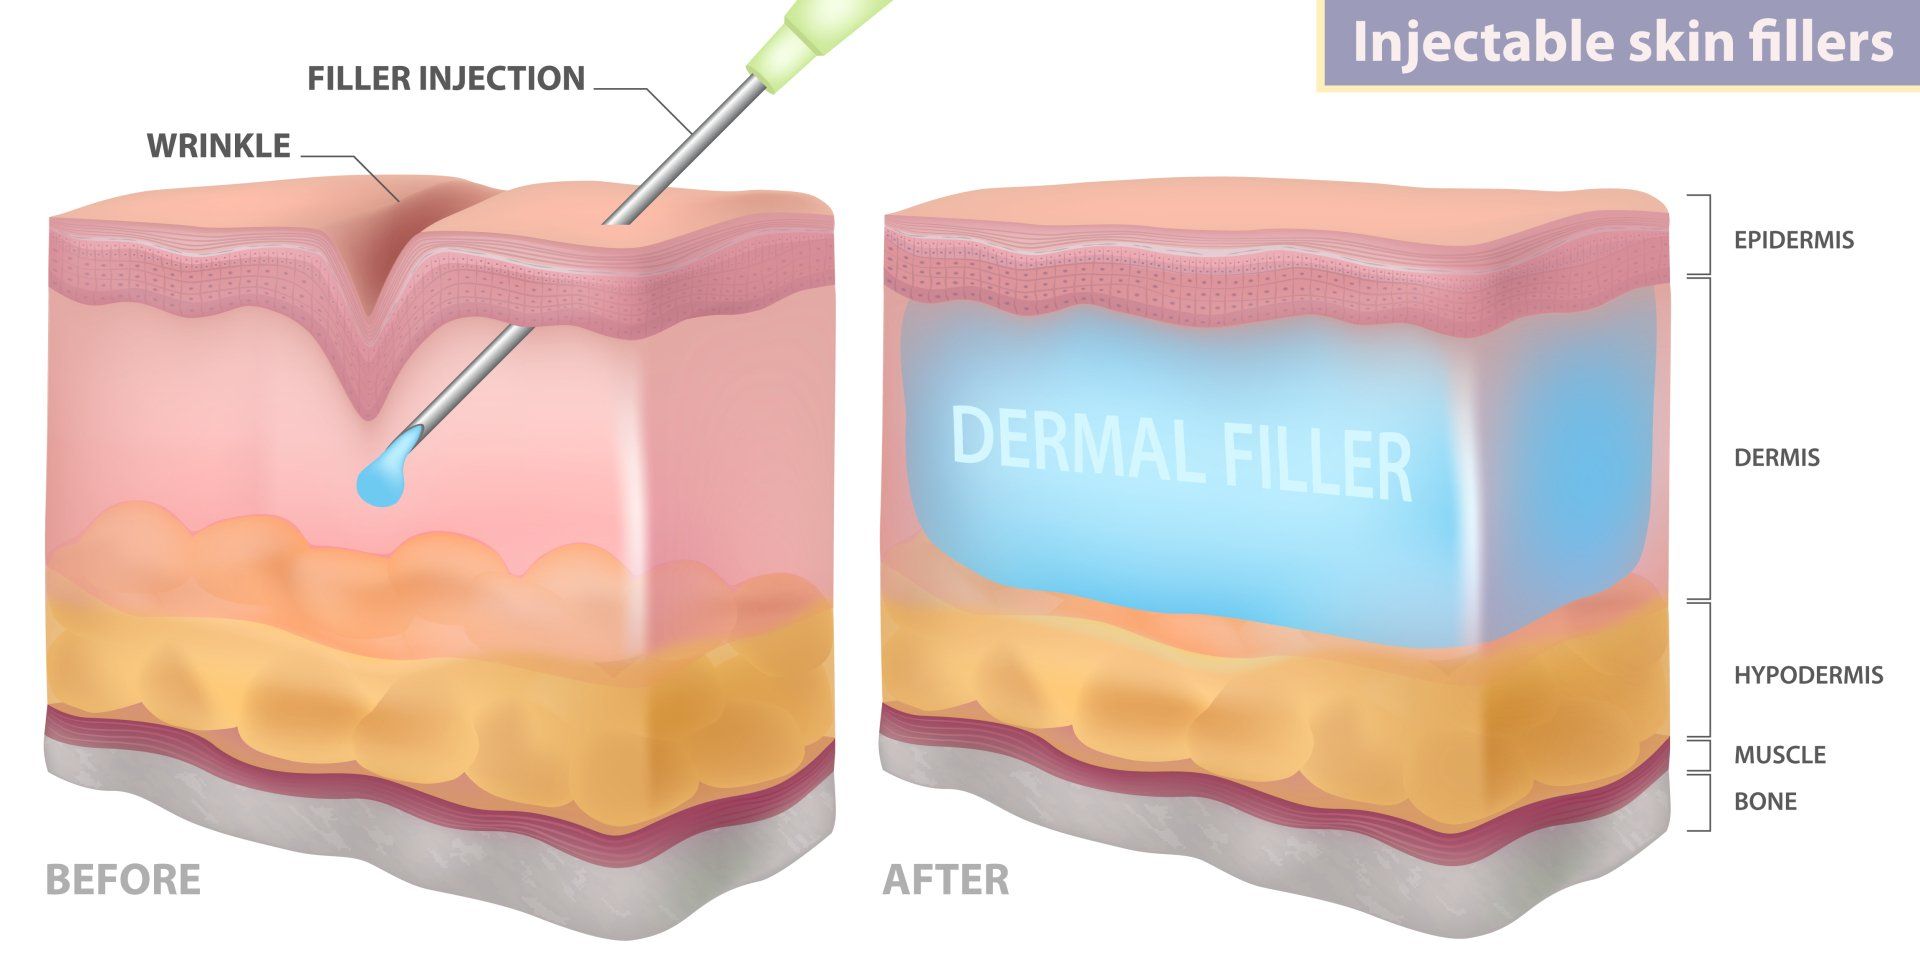 Dermal Fillers Enter into The Dermis and Support Creases and Wrinkles That are on the Upper Layers of Skin